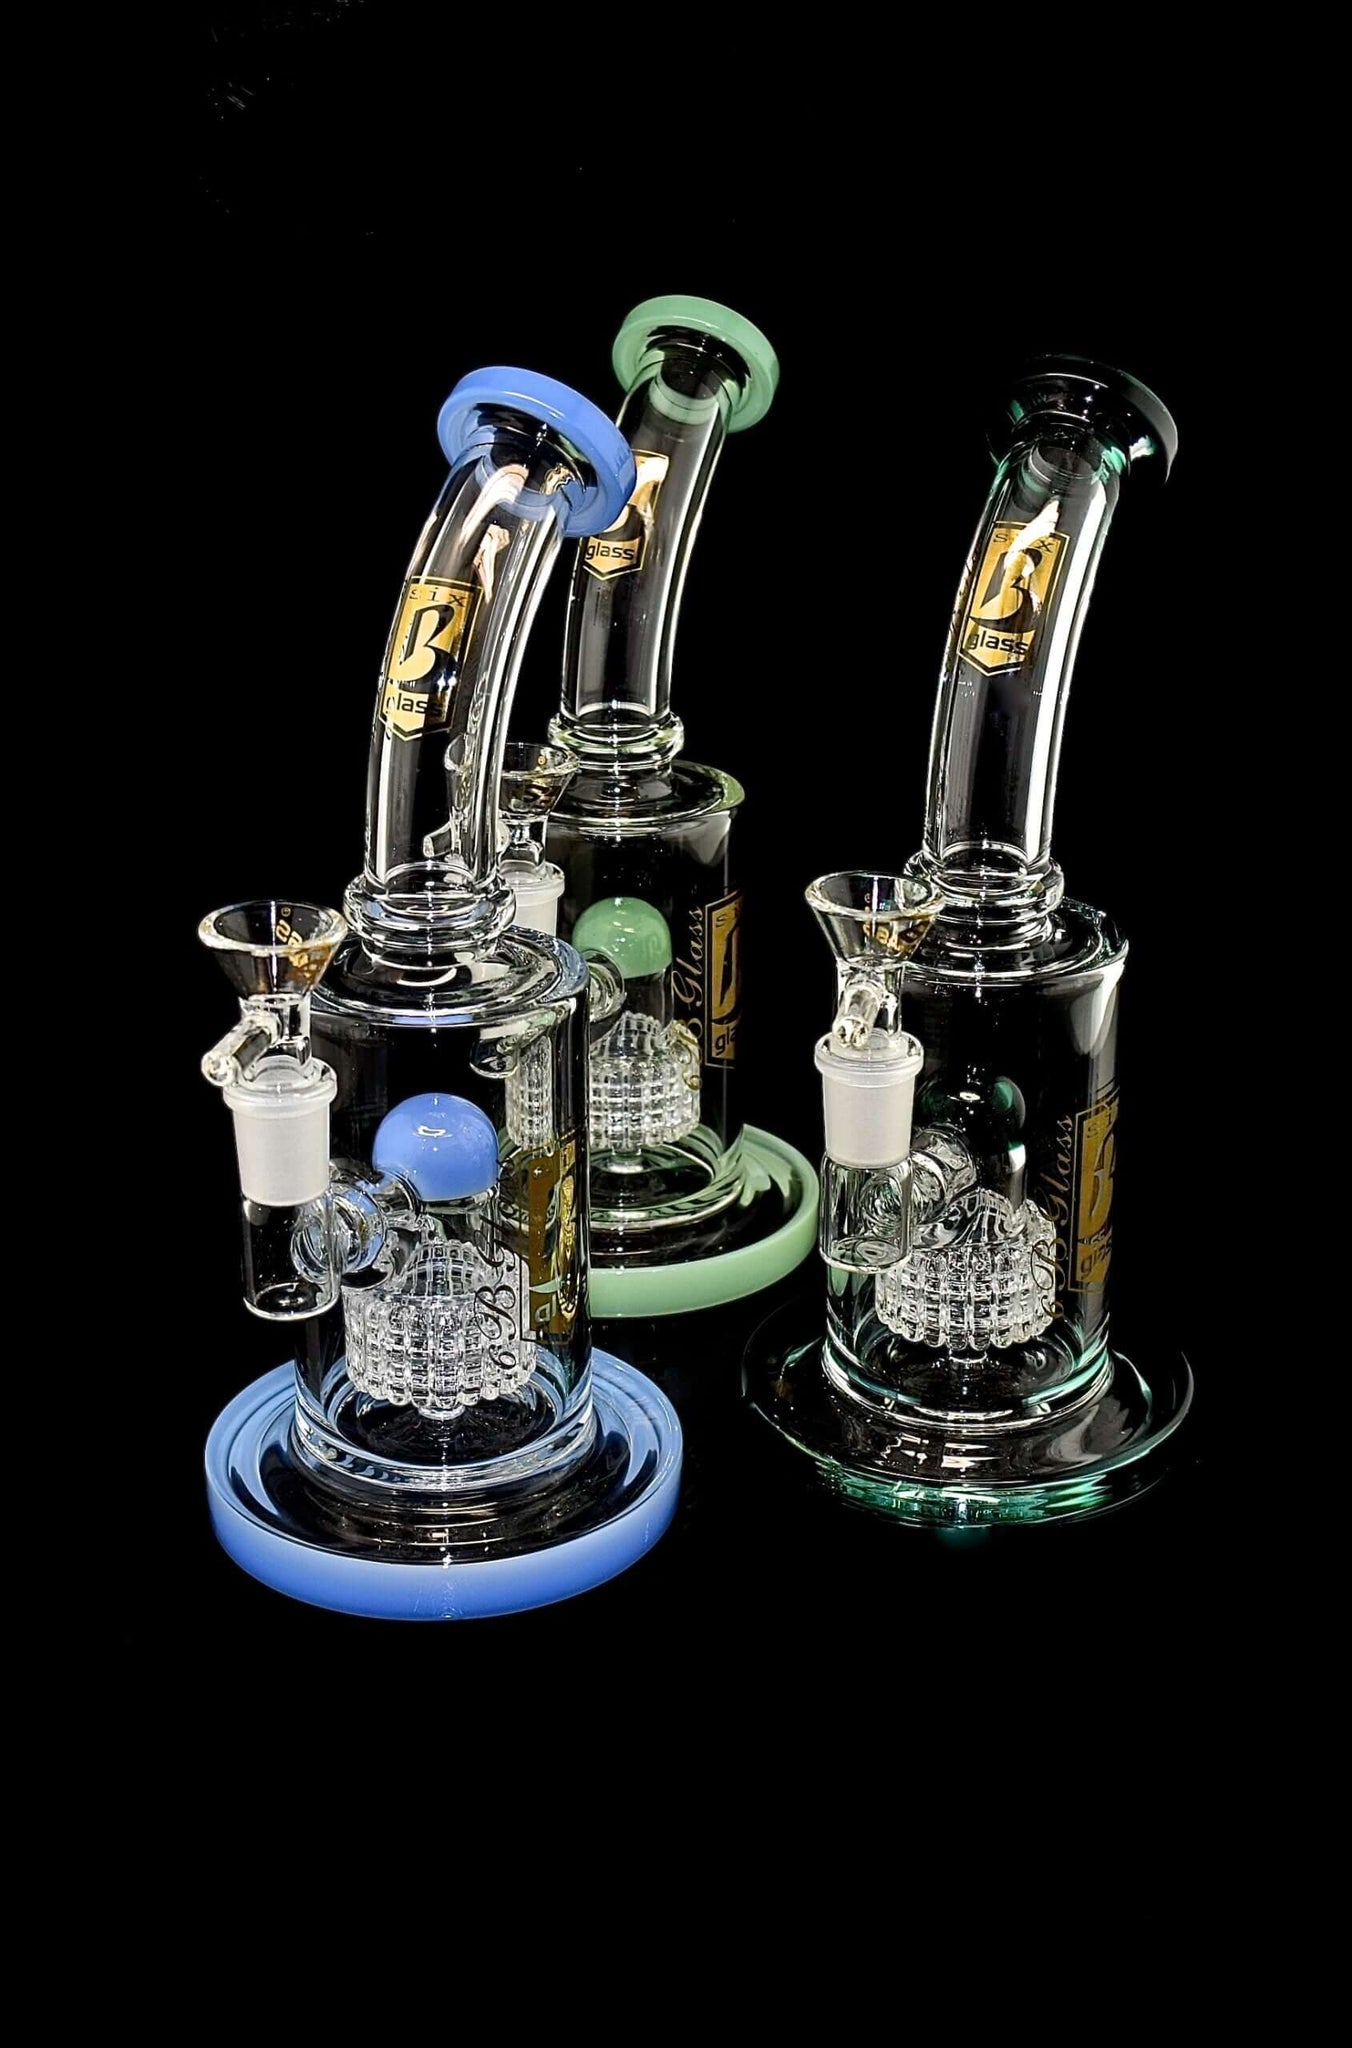 6B GLASS - 10'' Bent Smoking Waterpipe with Tire Perc | Wholesale Glass Pipe-2020B98